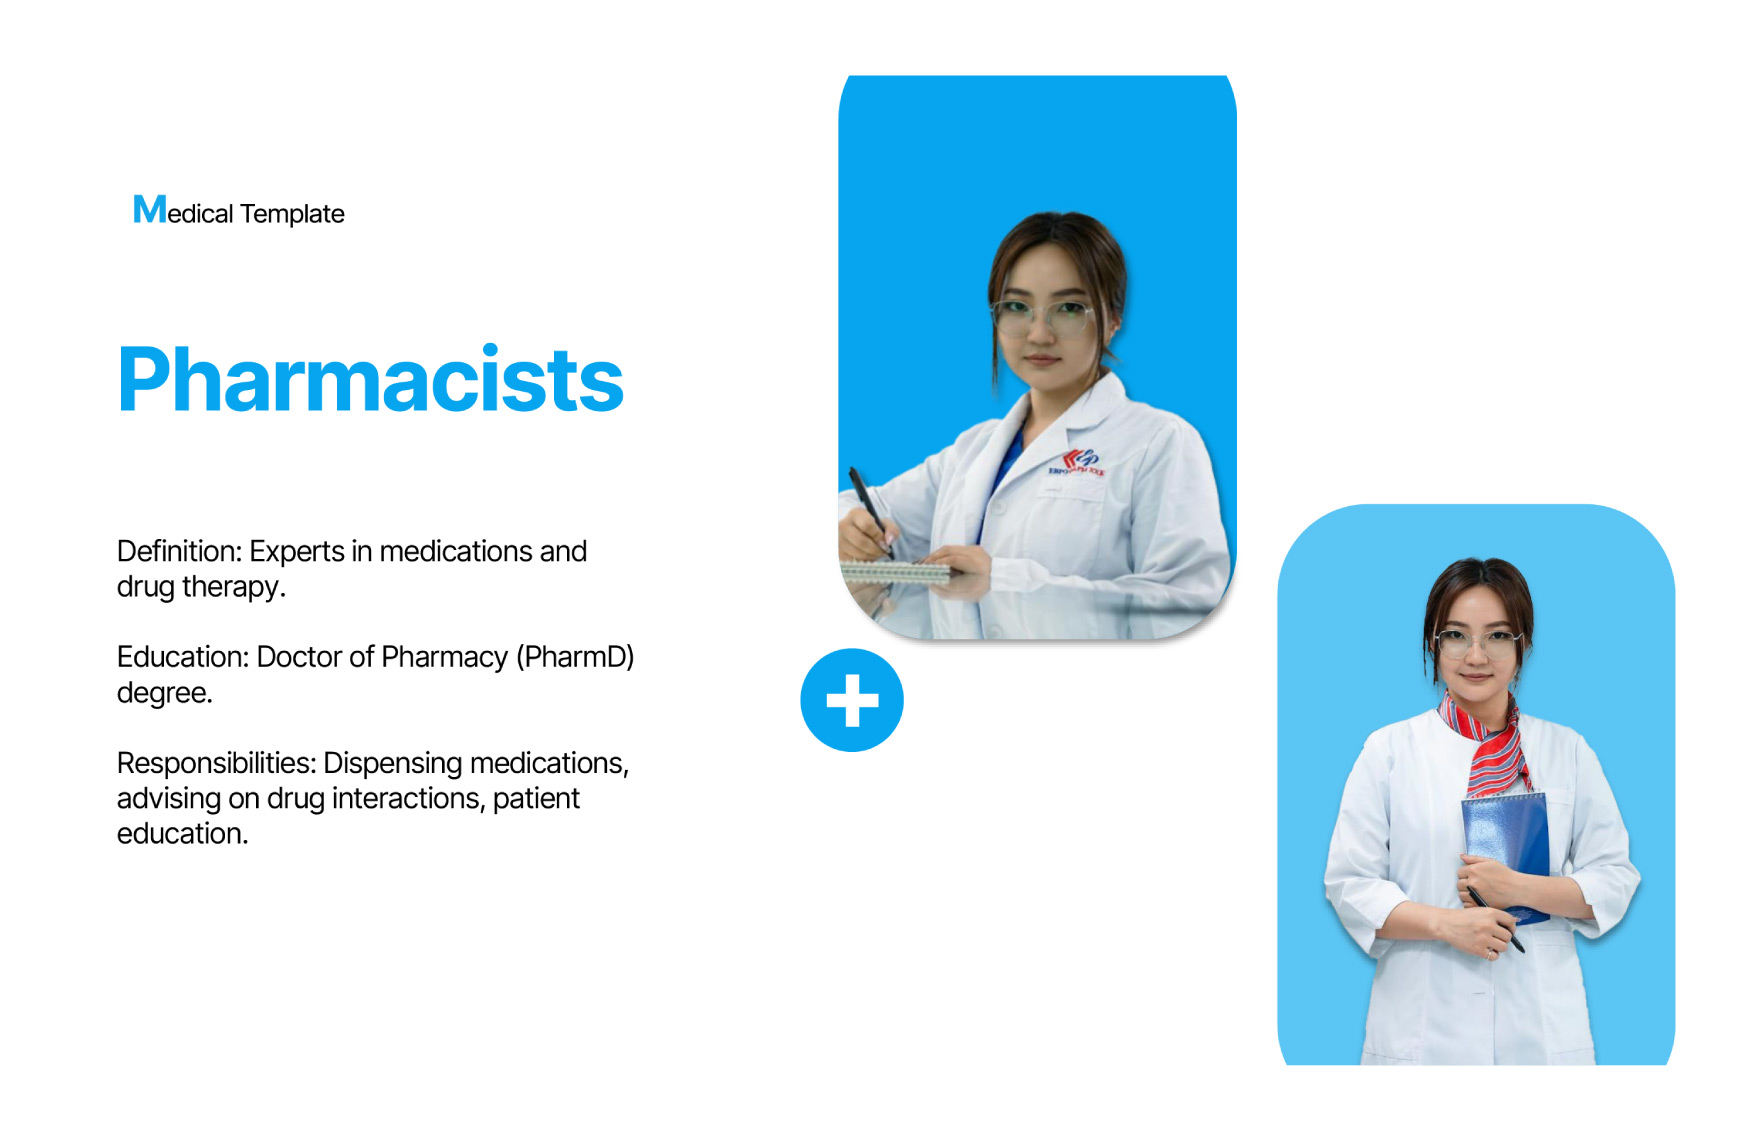 Professional Medical Template